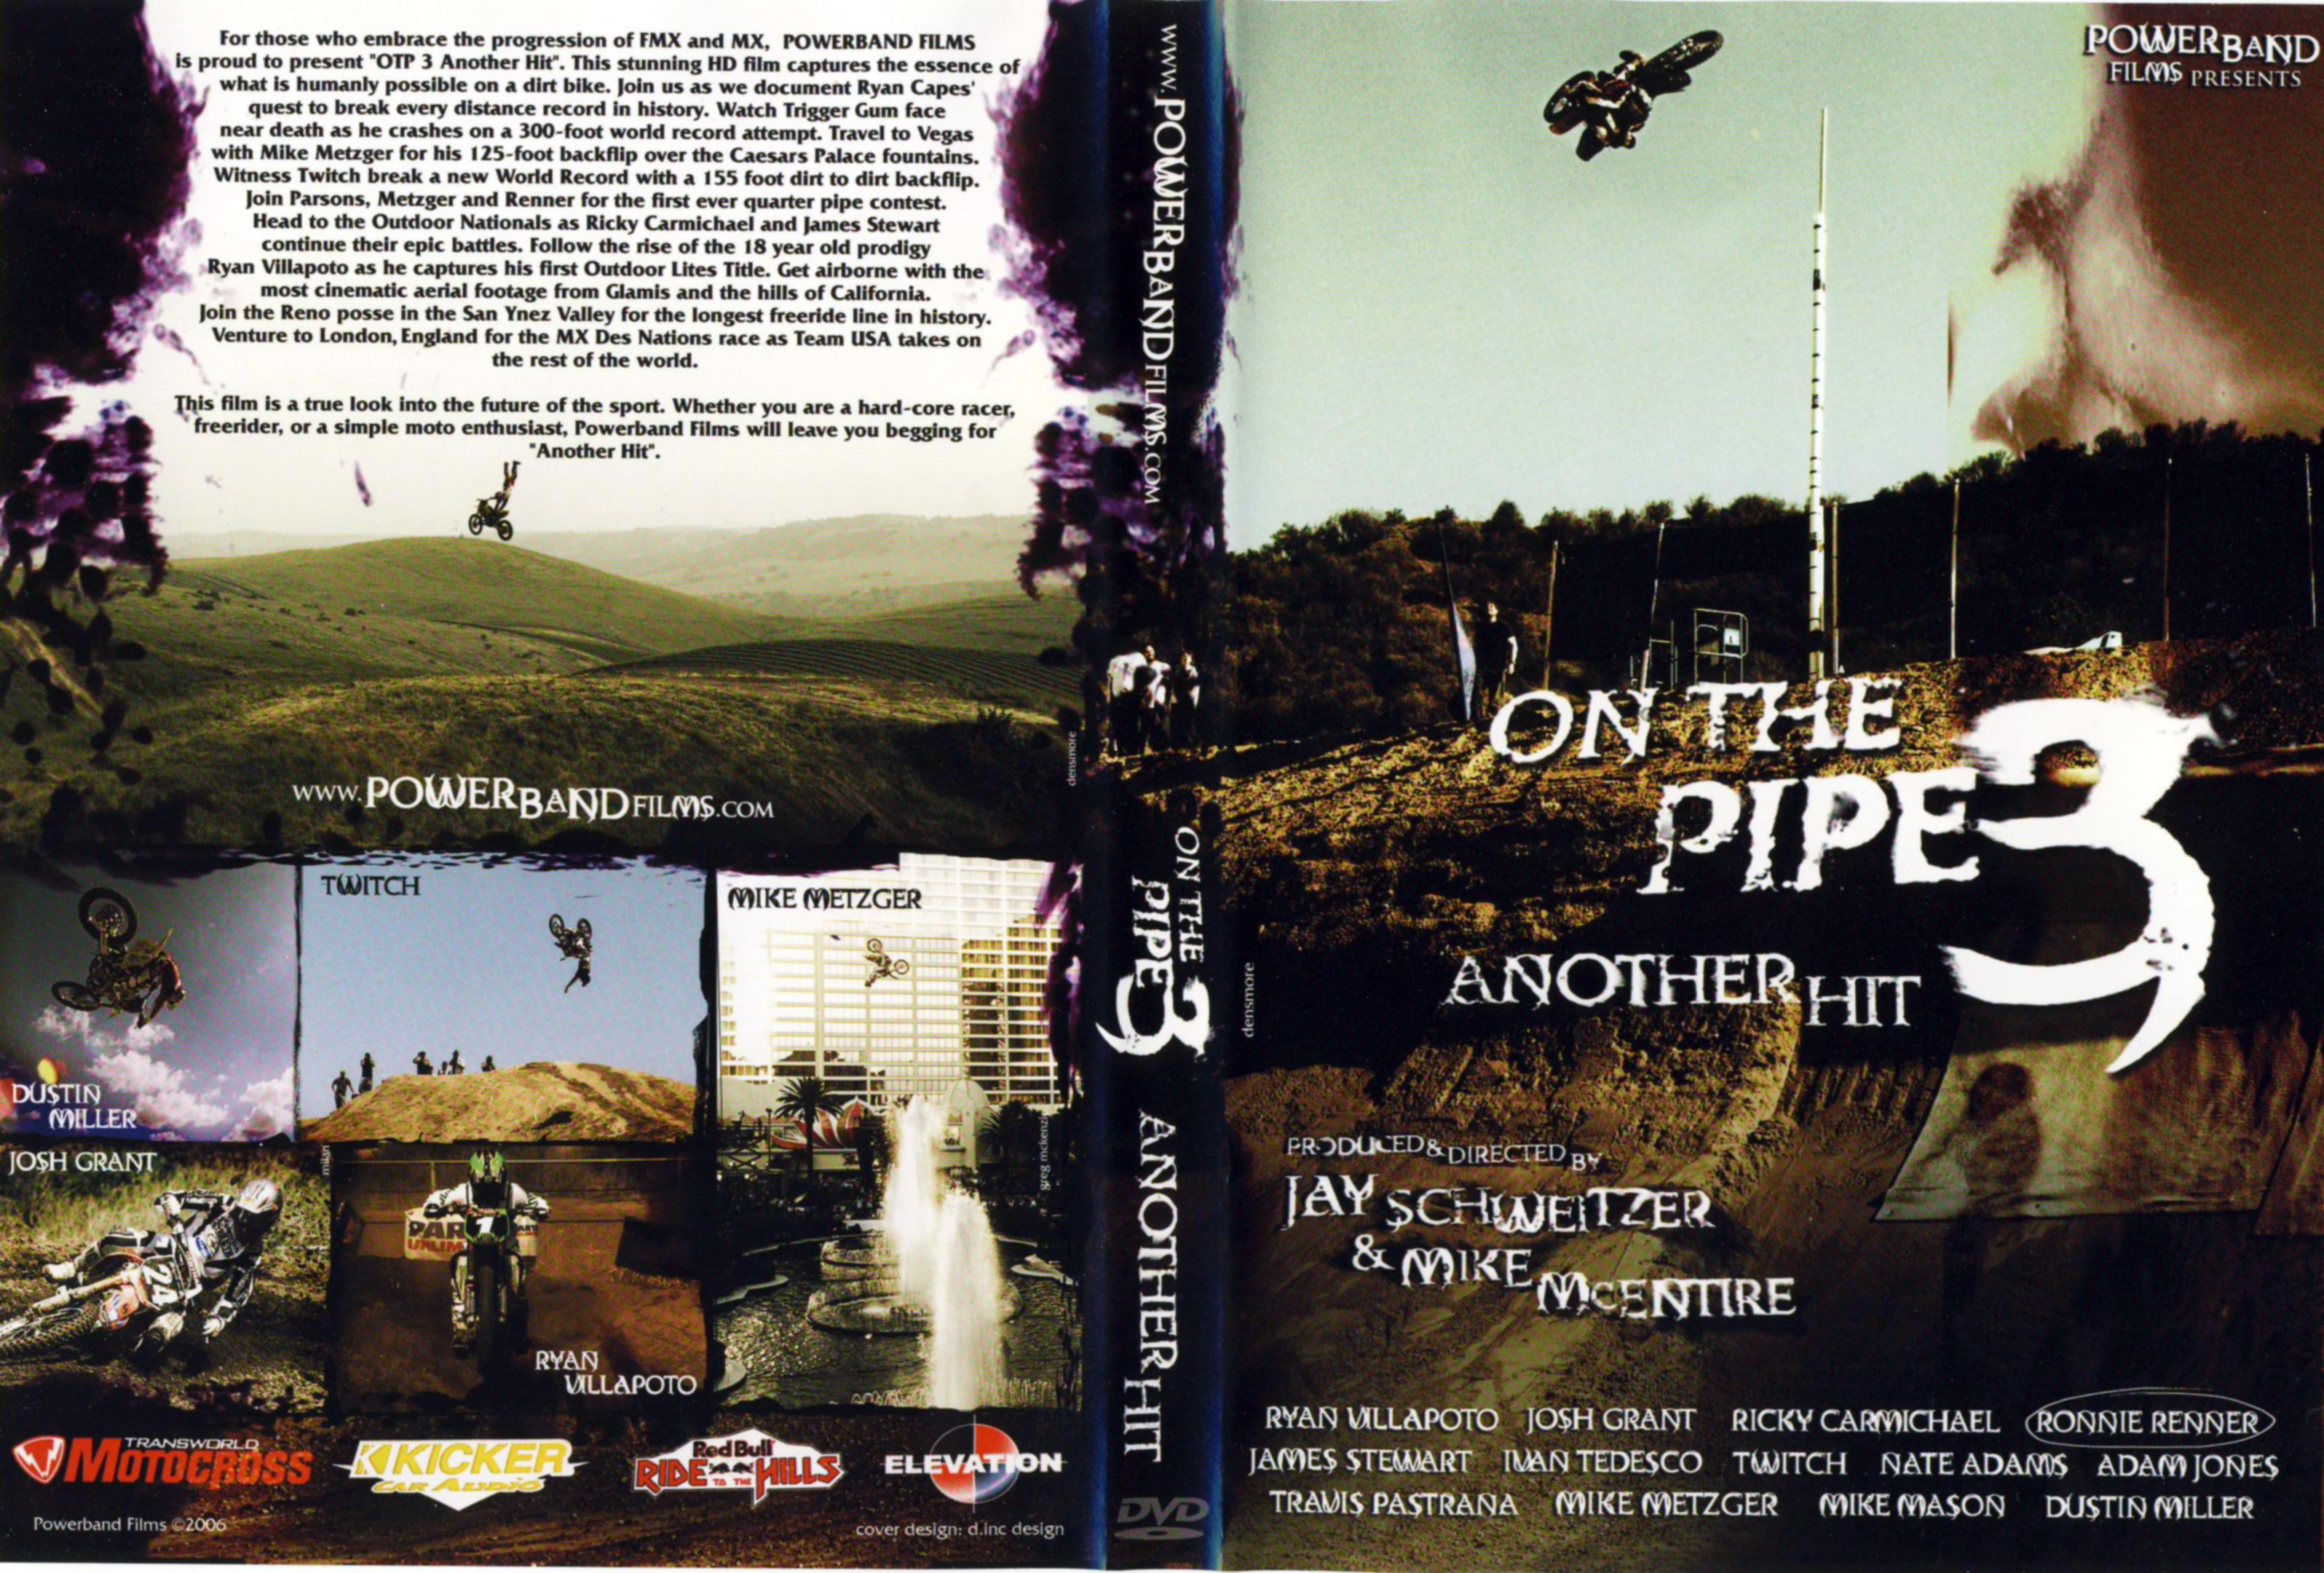 Jaquette DVD One the pipe 3